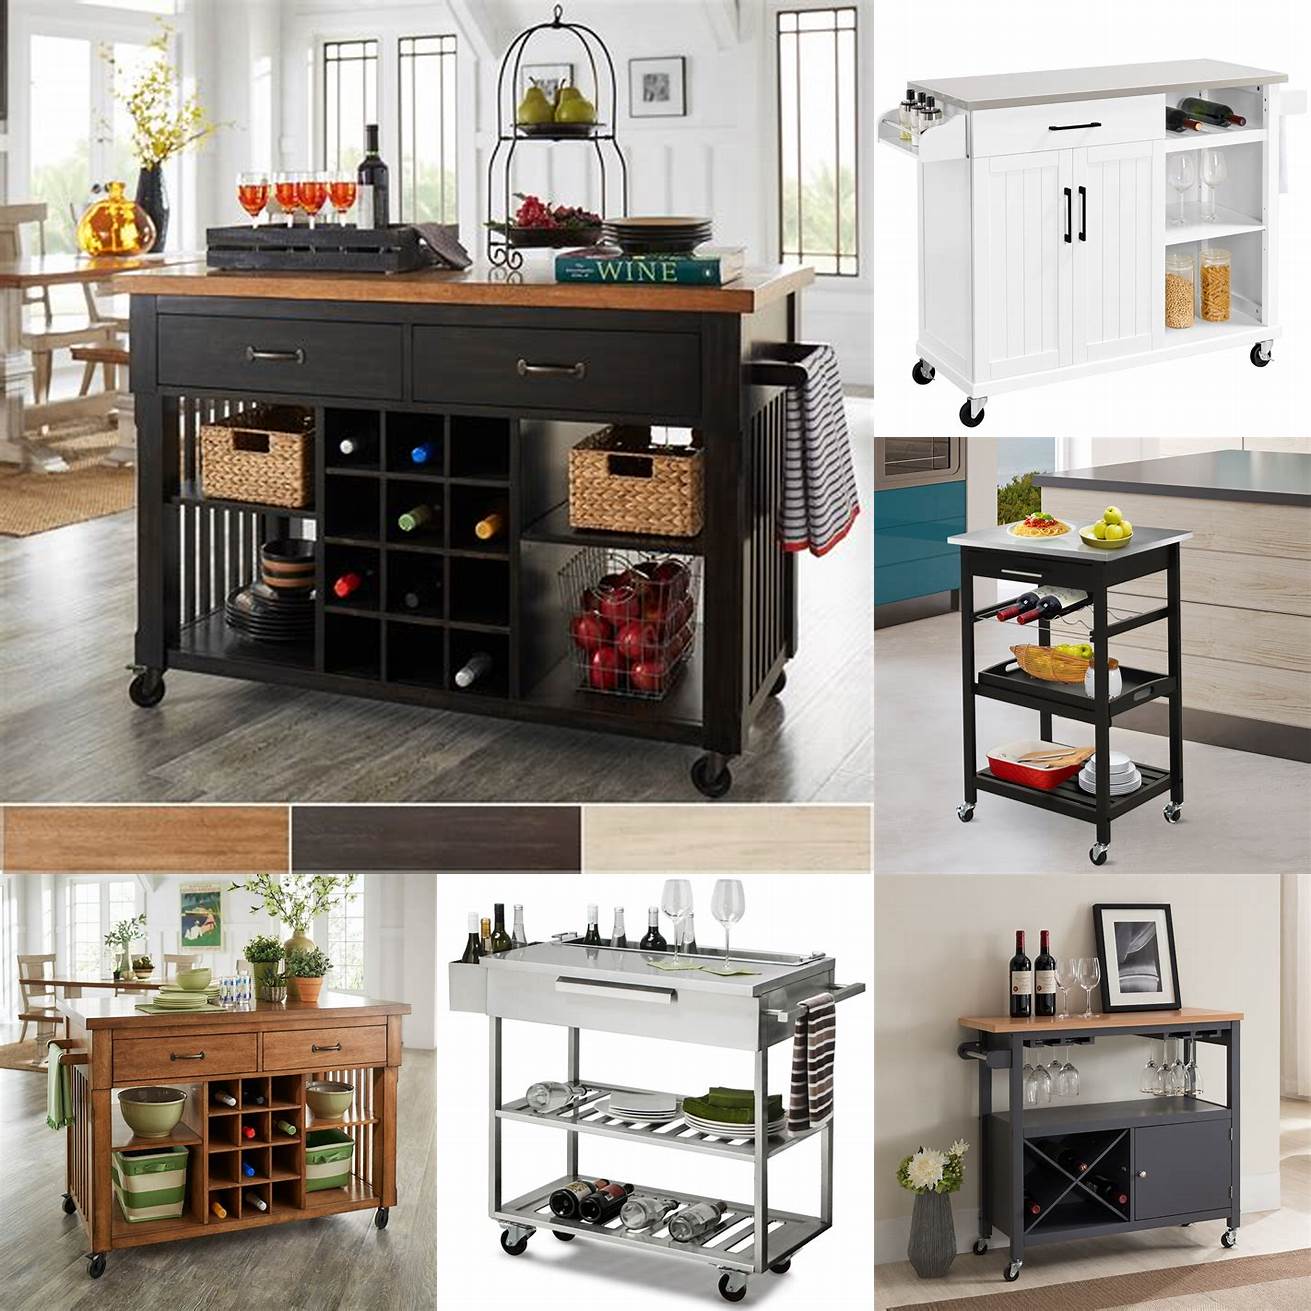 A stainless steel kitchen cart with a wine rack